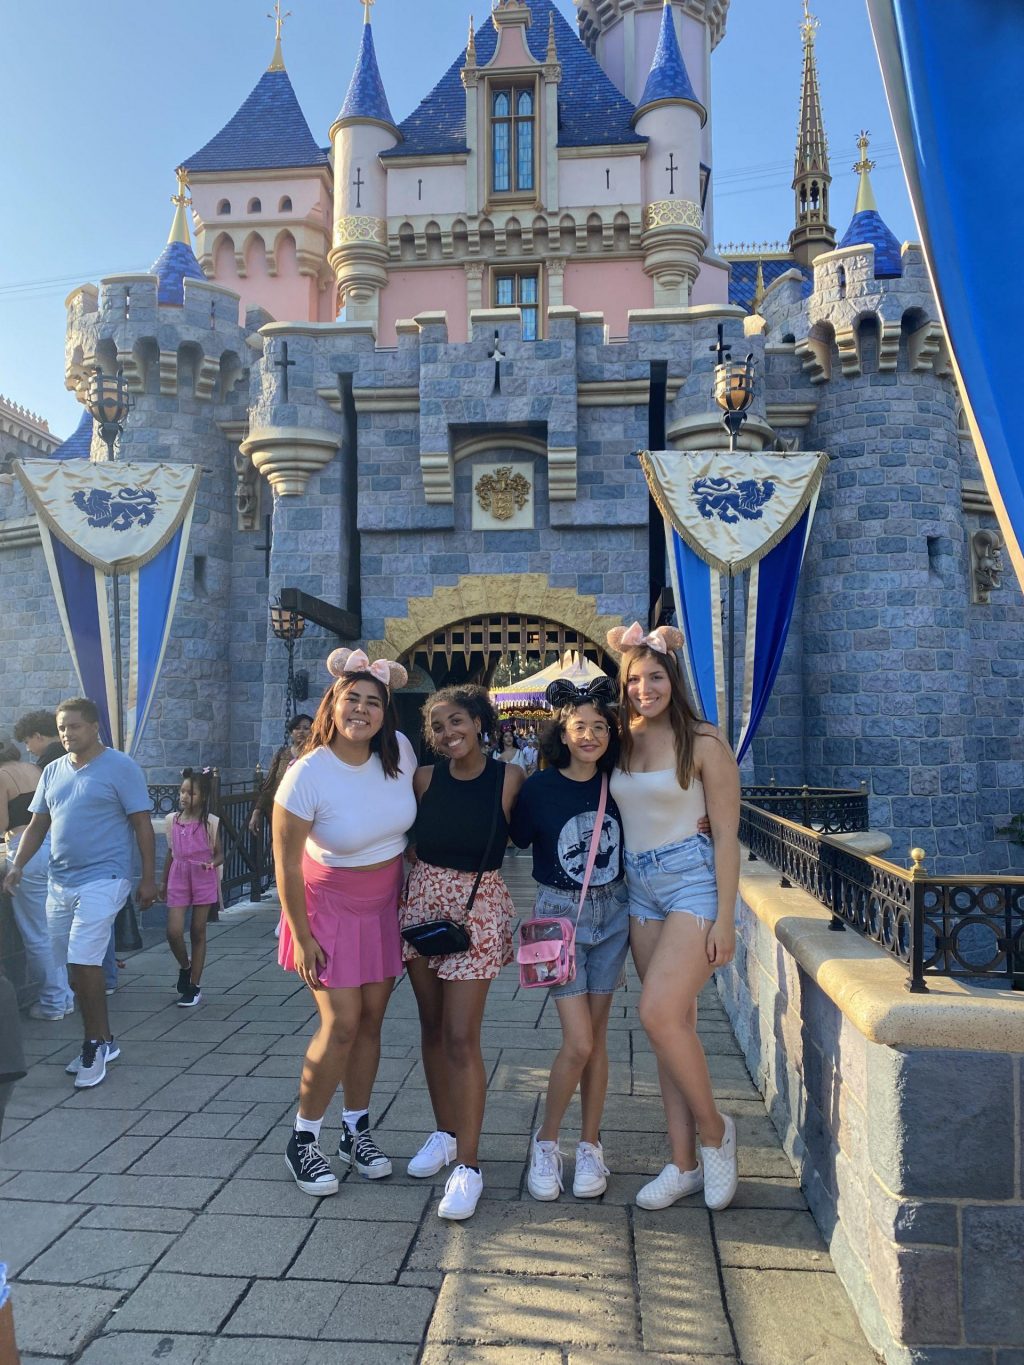 My friends Kim, Kaila, Sarah and I all smile under the castle at Disneyland on Aug. 2. We all got "pixie dusted" right before, which is when a cast member sprinkles glitter on you as you make a wish.